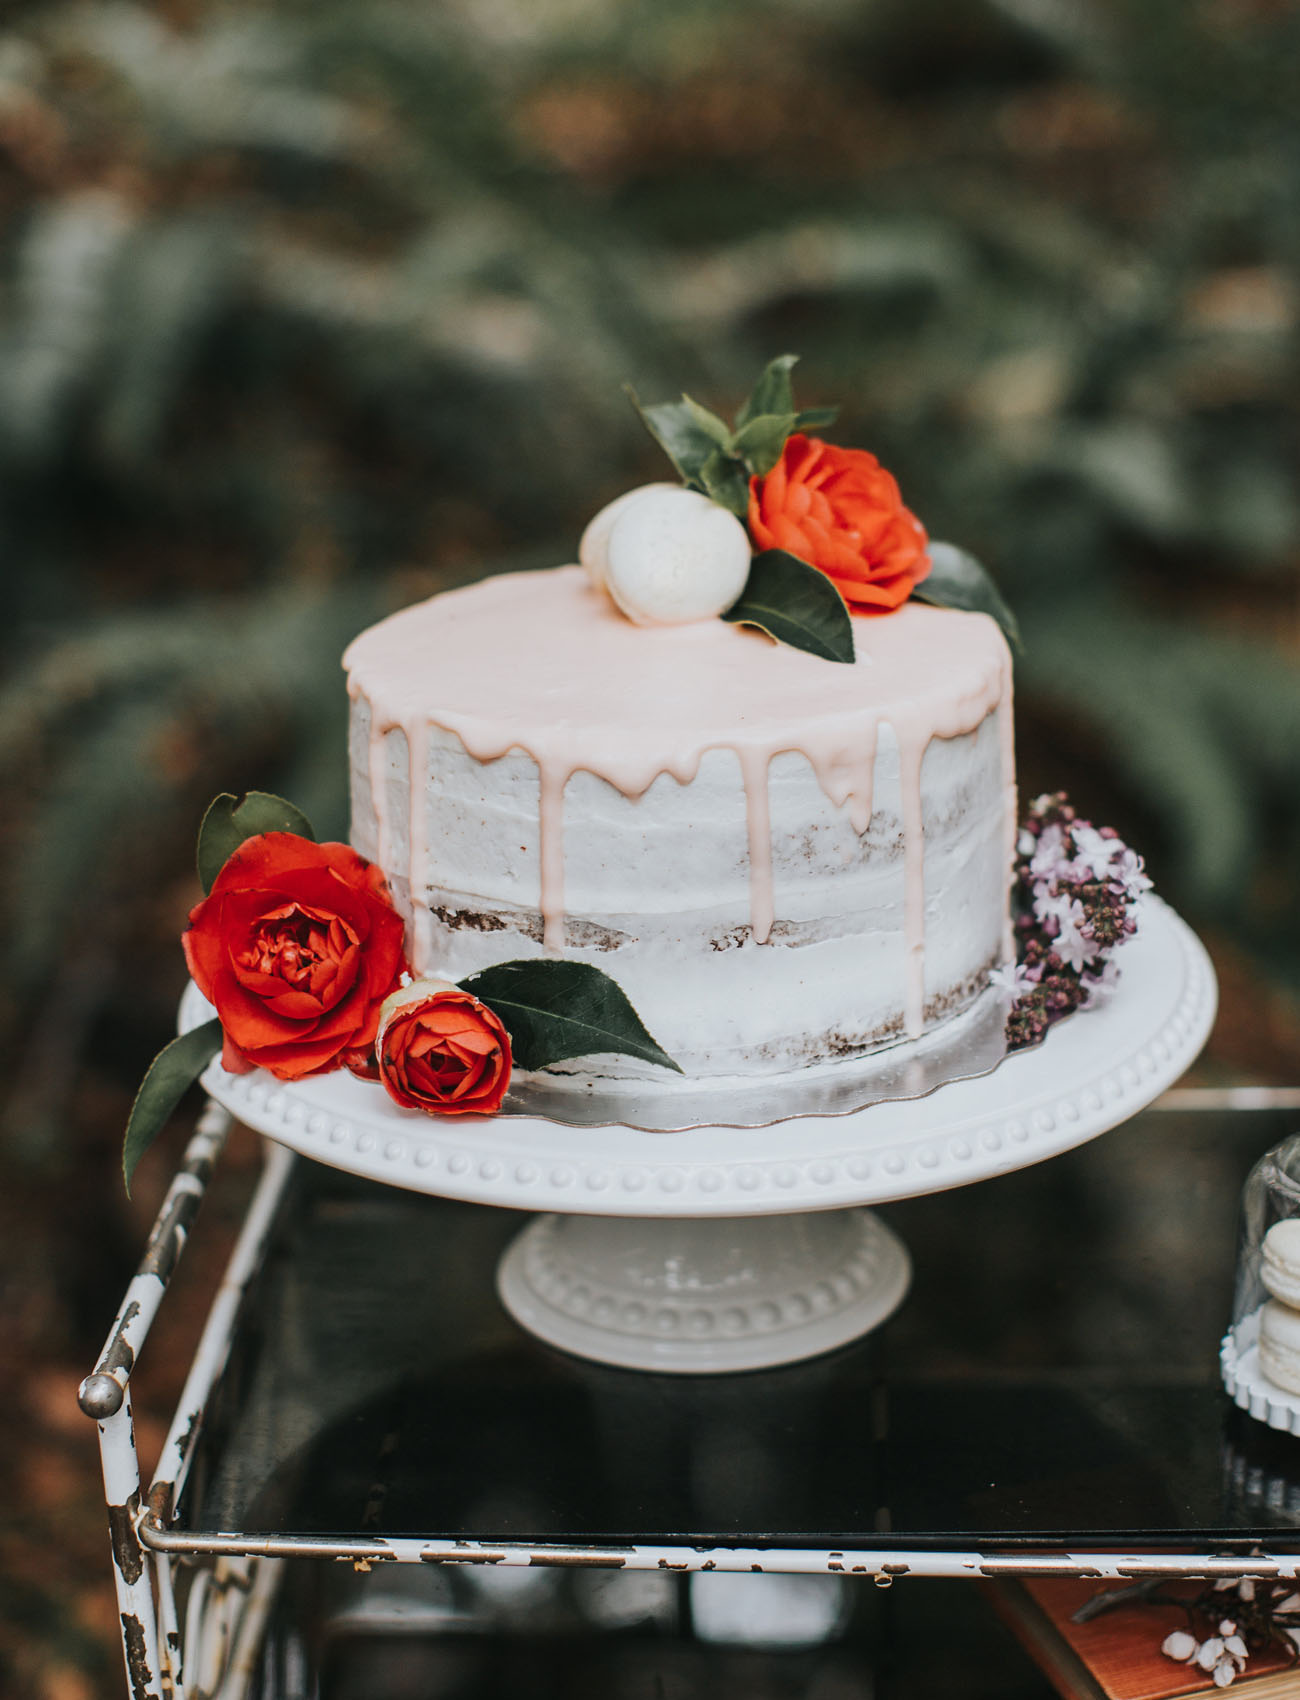 The wedding cake was a semi-naked one, with pink glazing, topped with orange blooms and macarons